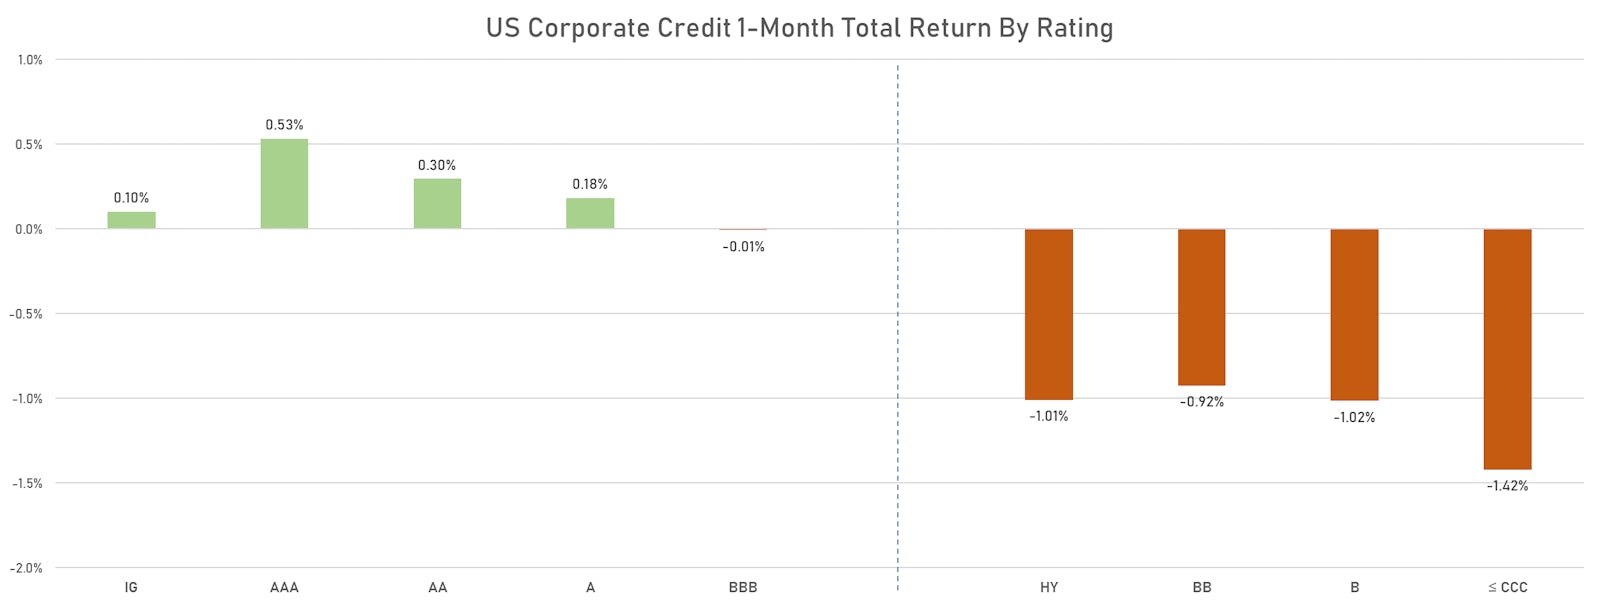 1-Month Performance Of ICE BofA US Corporate Indices By Rating | Sources: ϕpost, FactSet data